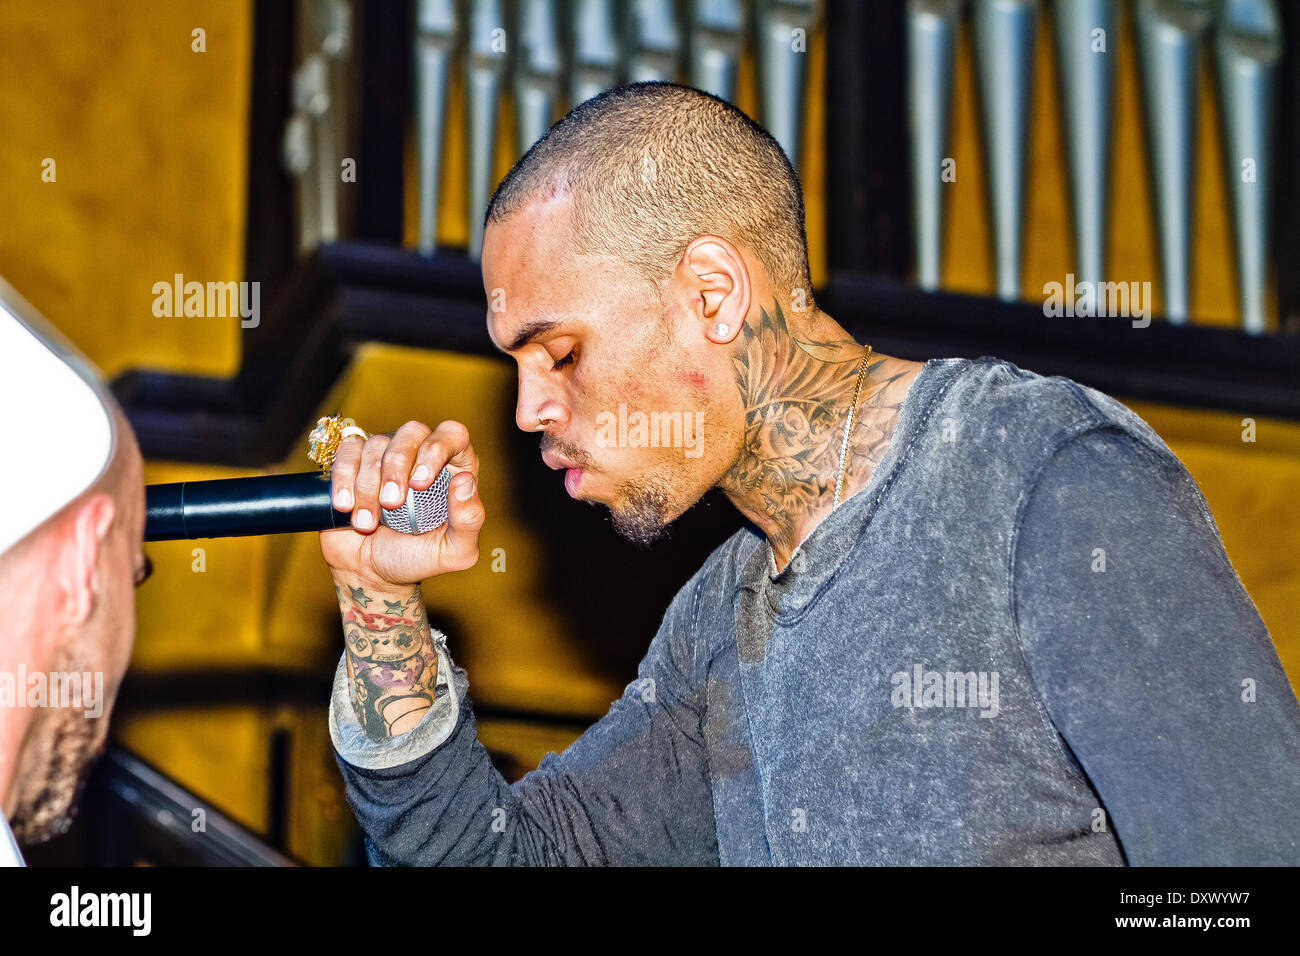 Rihanna and Chris Brown partying together around 1am at Adagio Nightclub at the aftershow party for Chris Brown's concert at o2 arena. Where: Berlin Germany When: 23 Nov 2012 Stock Photo